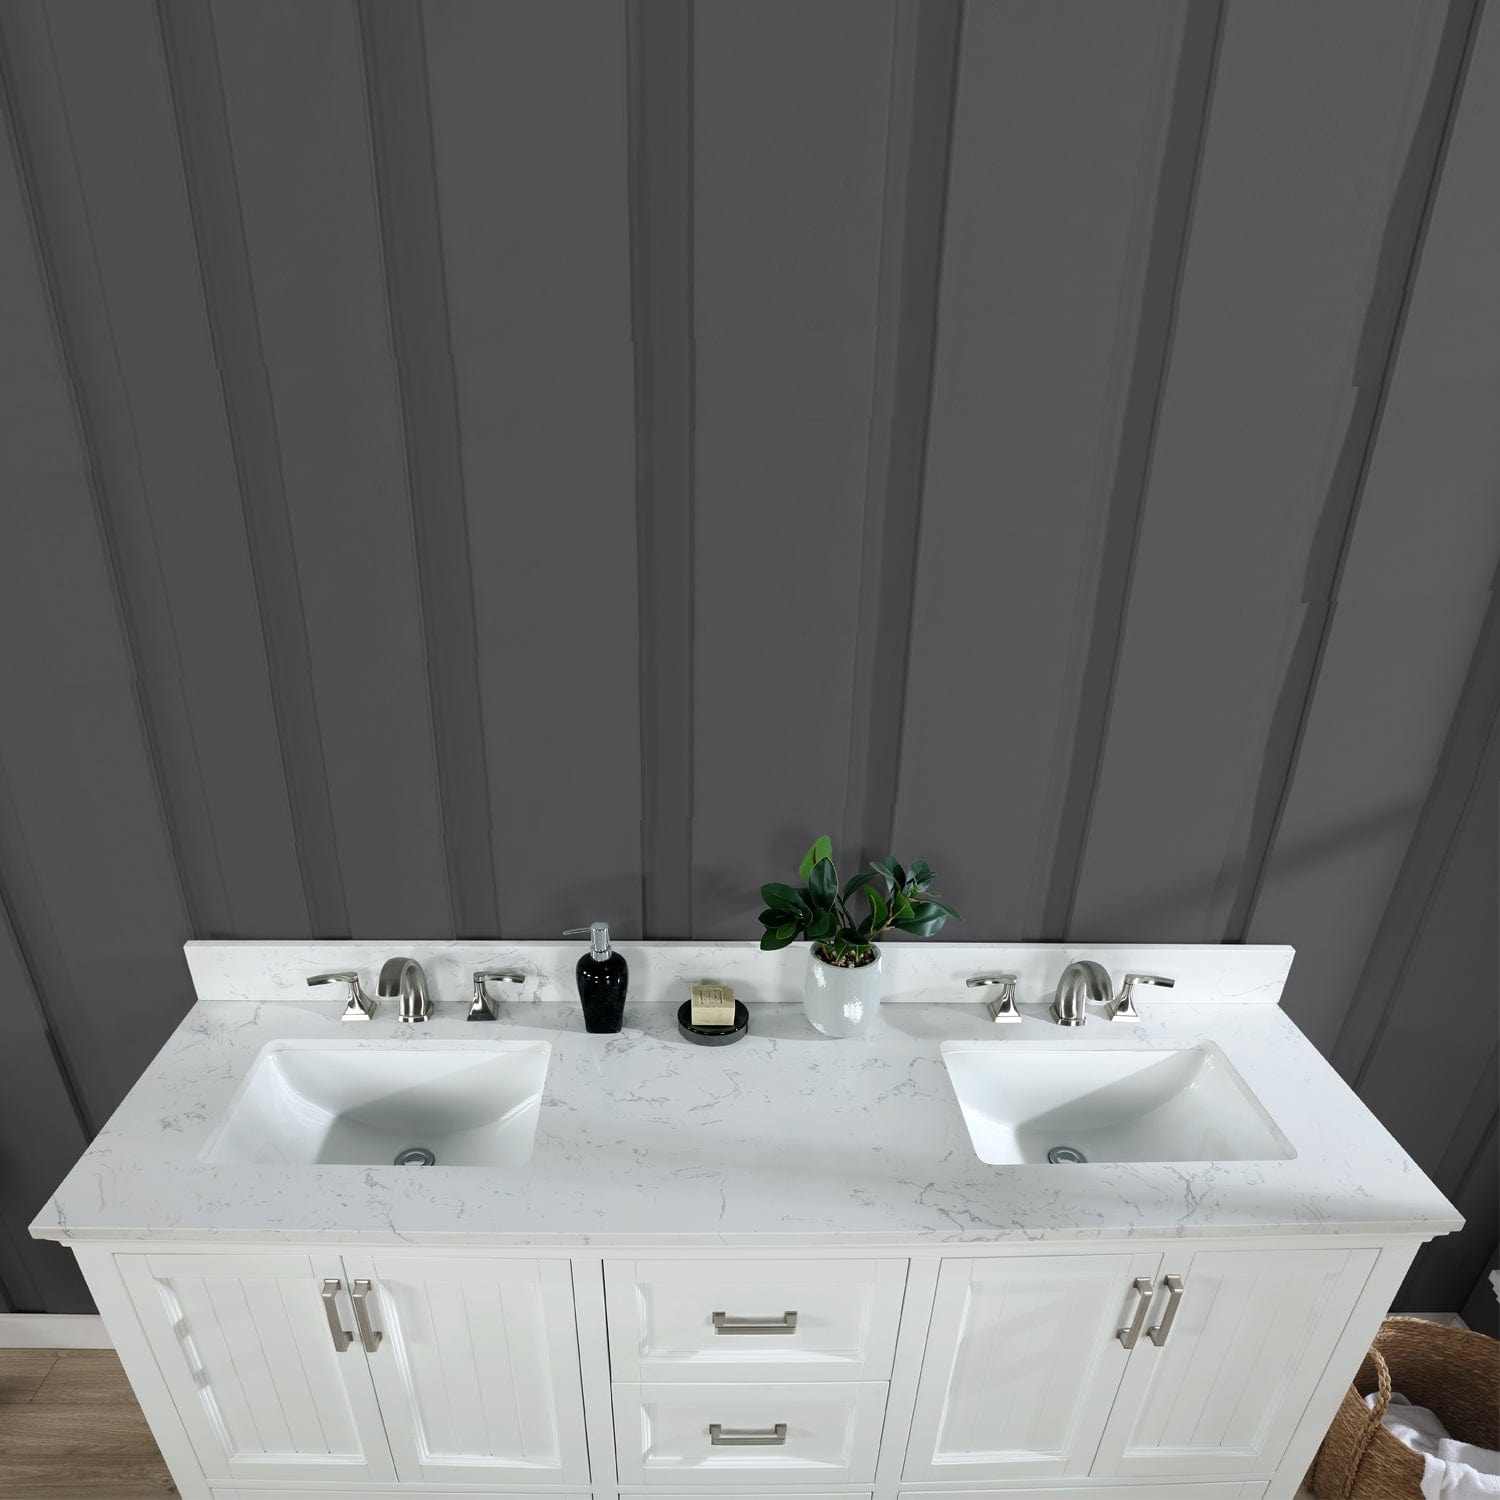 Altair Isla 72" Double Bathroom Vanity Set in White and Carrara White Marble Countertop without Mirror 538072-WH-AW-NM - Molaix696952511383Vanity538072-WH-AW-NM